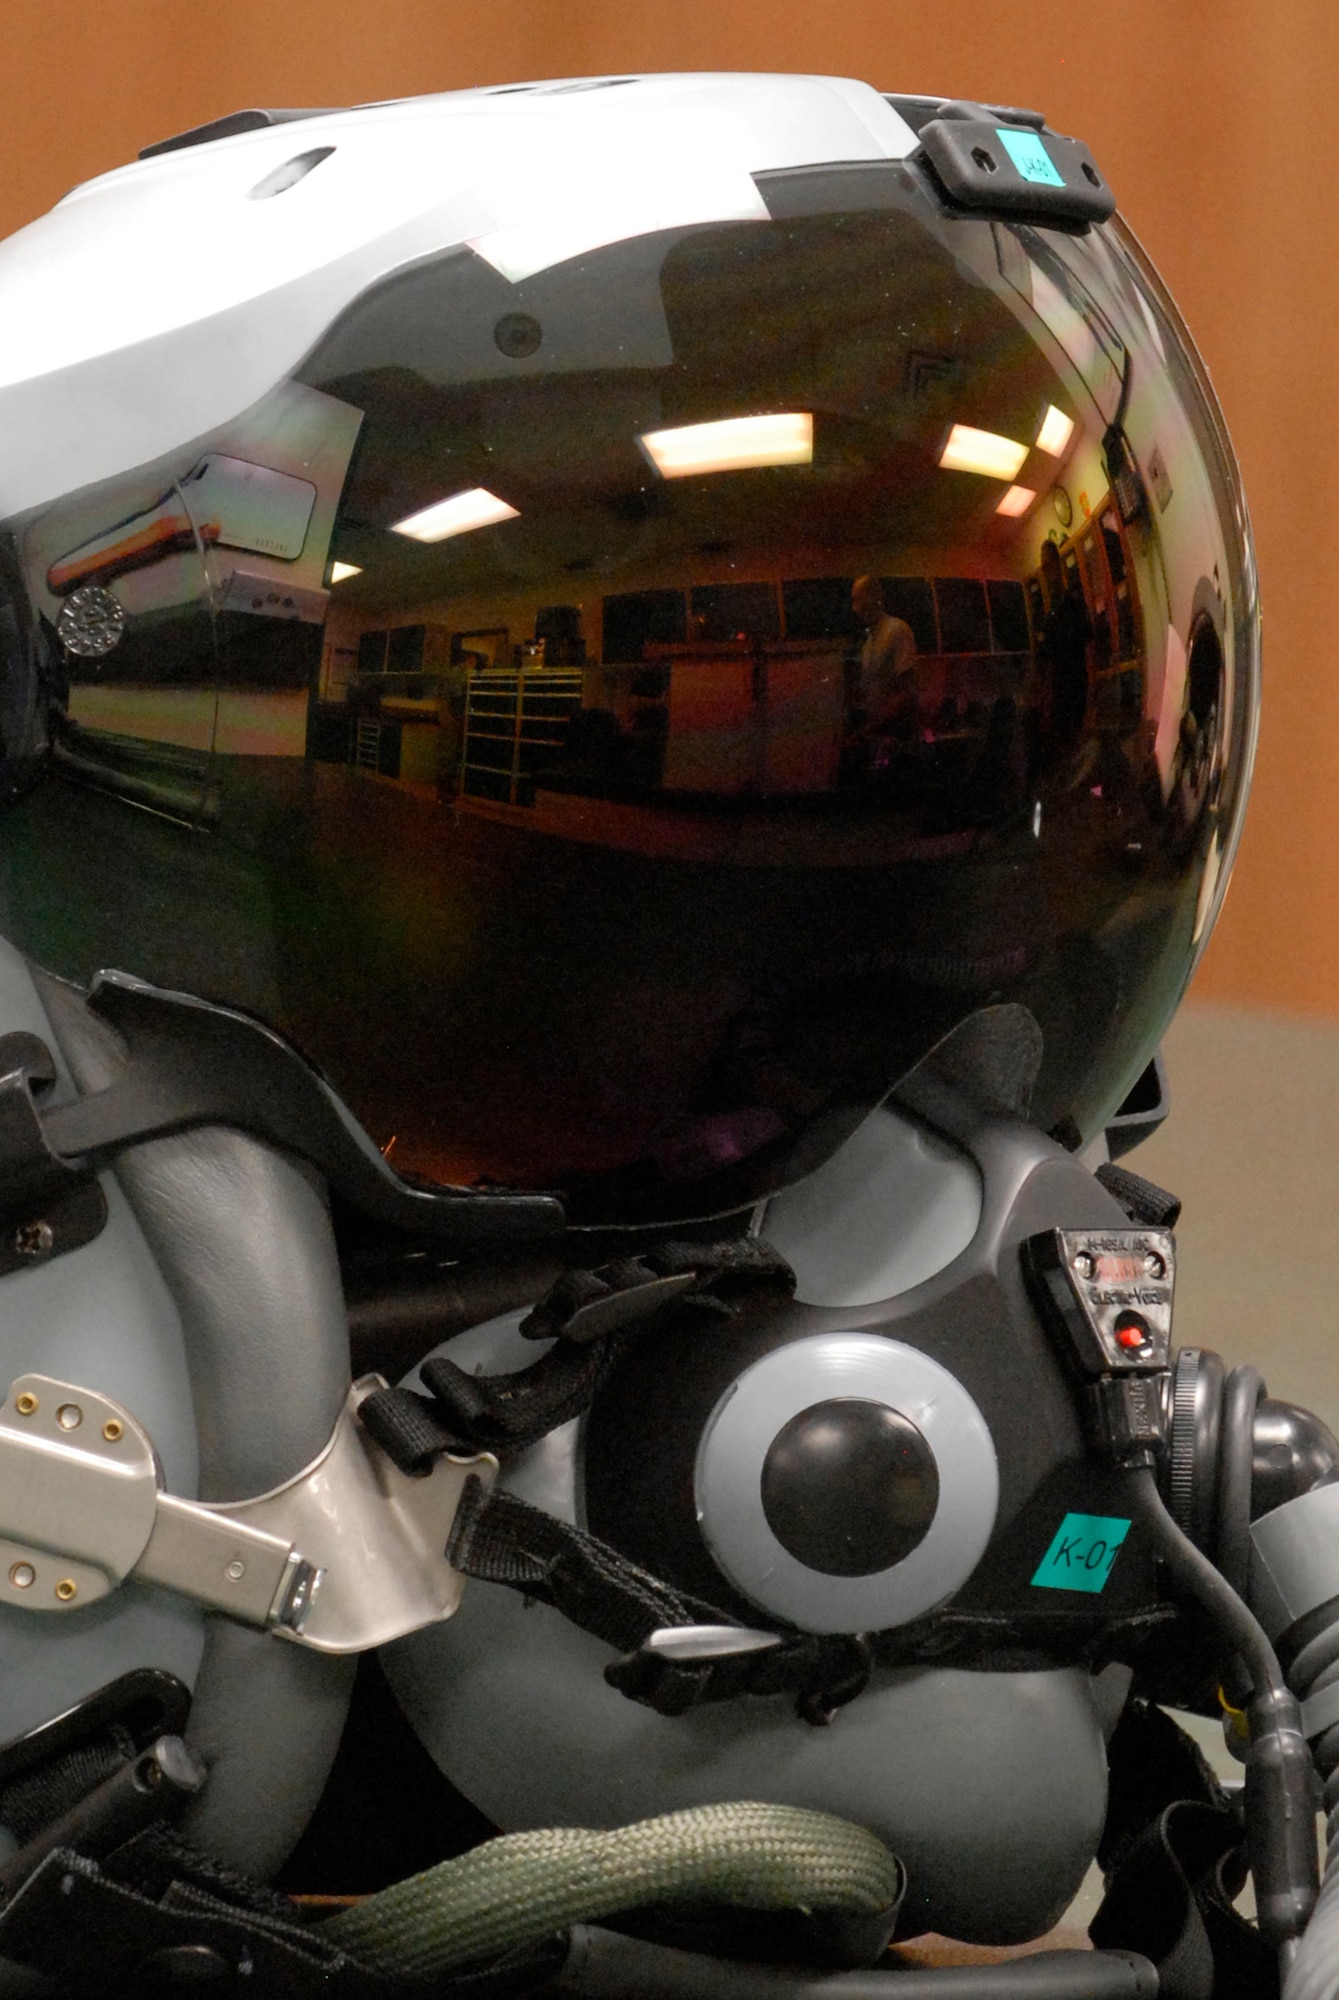 The Display Unit helmet is a new tool used by Luke pilots. The DU projects heads up display information on the pilots visor directly in front of the right eye. The DU has an approximate cost of $70k.  (U.S. Air Force photo/Staff Sergeant Christopher Hummel)